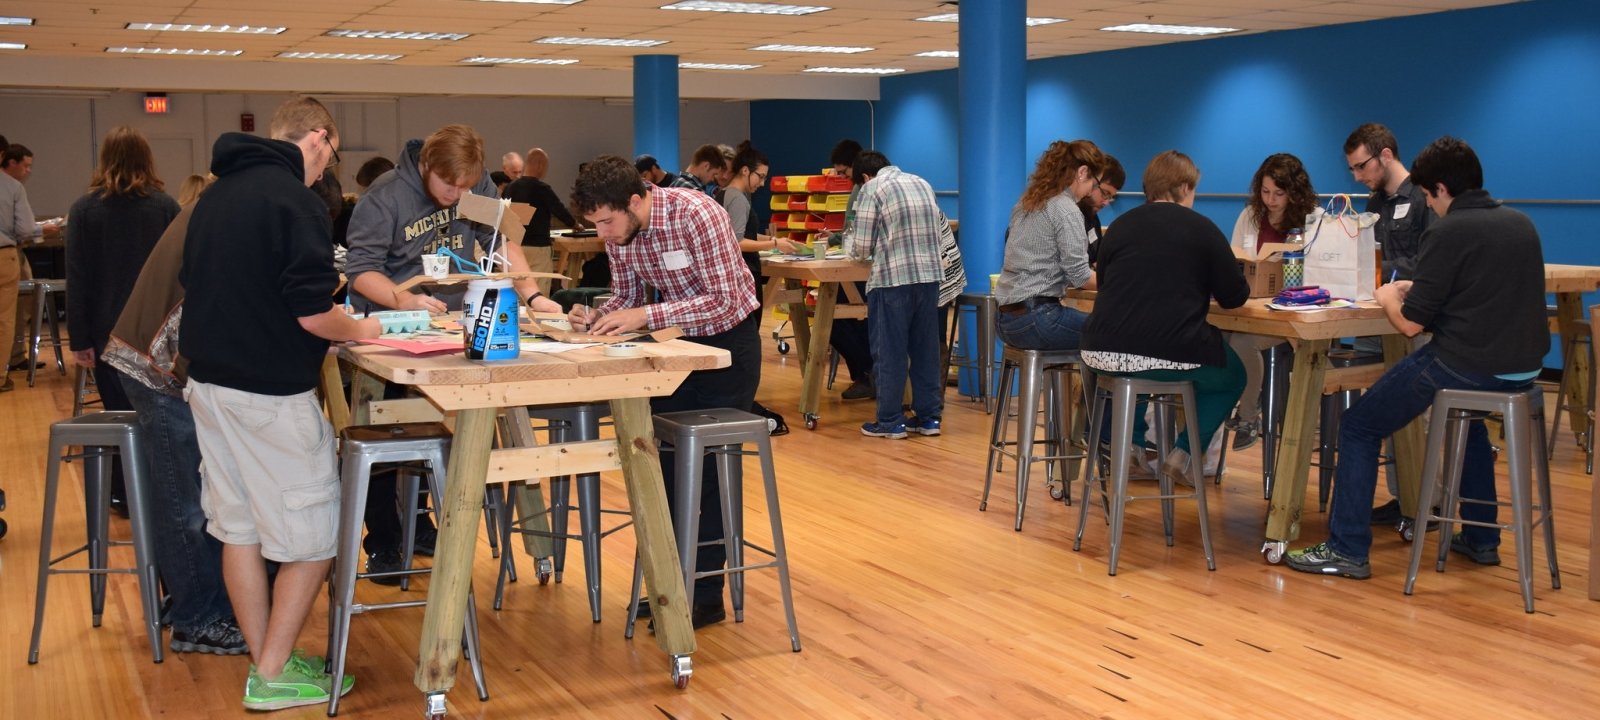 A group photo of students at the D80 conference working at tables in the Makerspace.